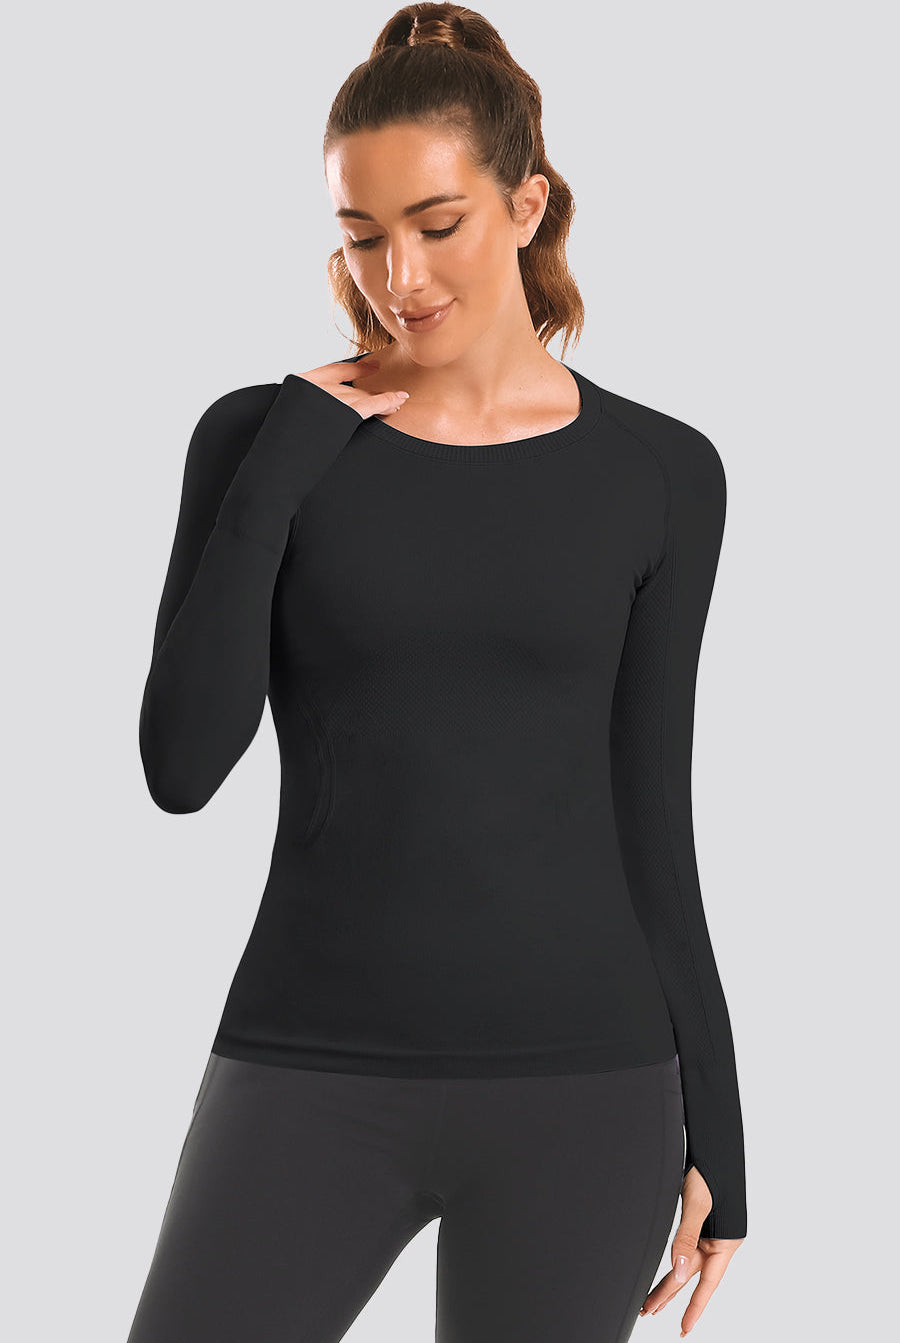 Seamless Long Sleeve black front